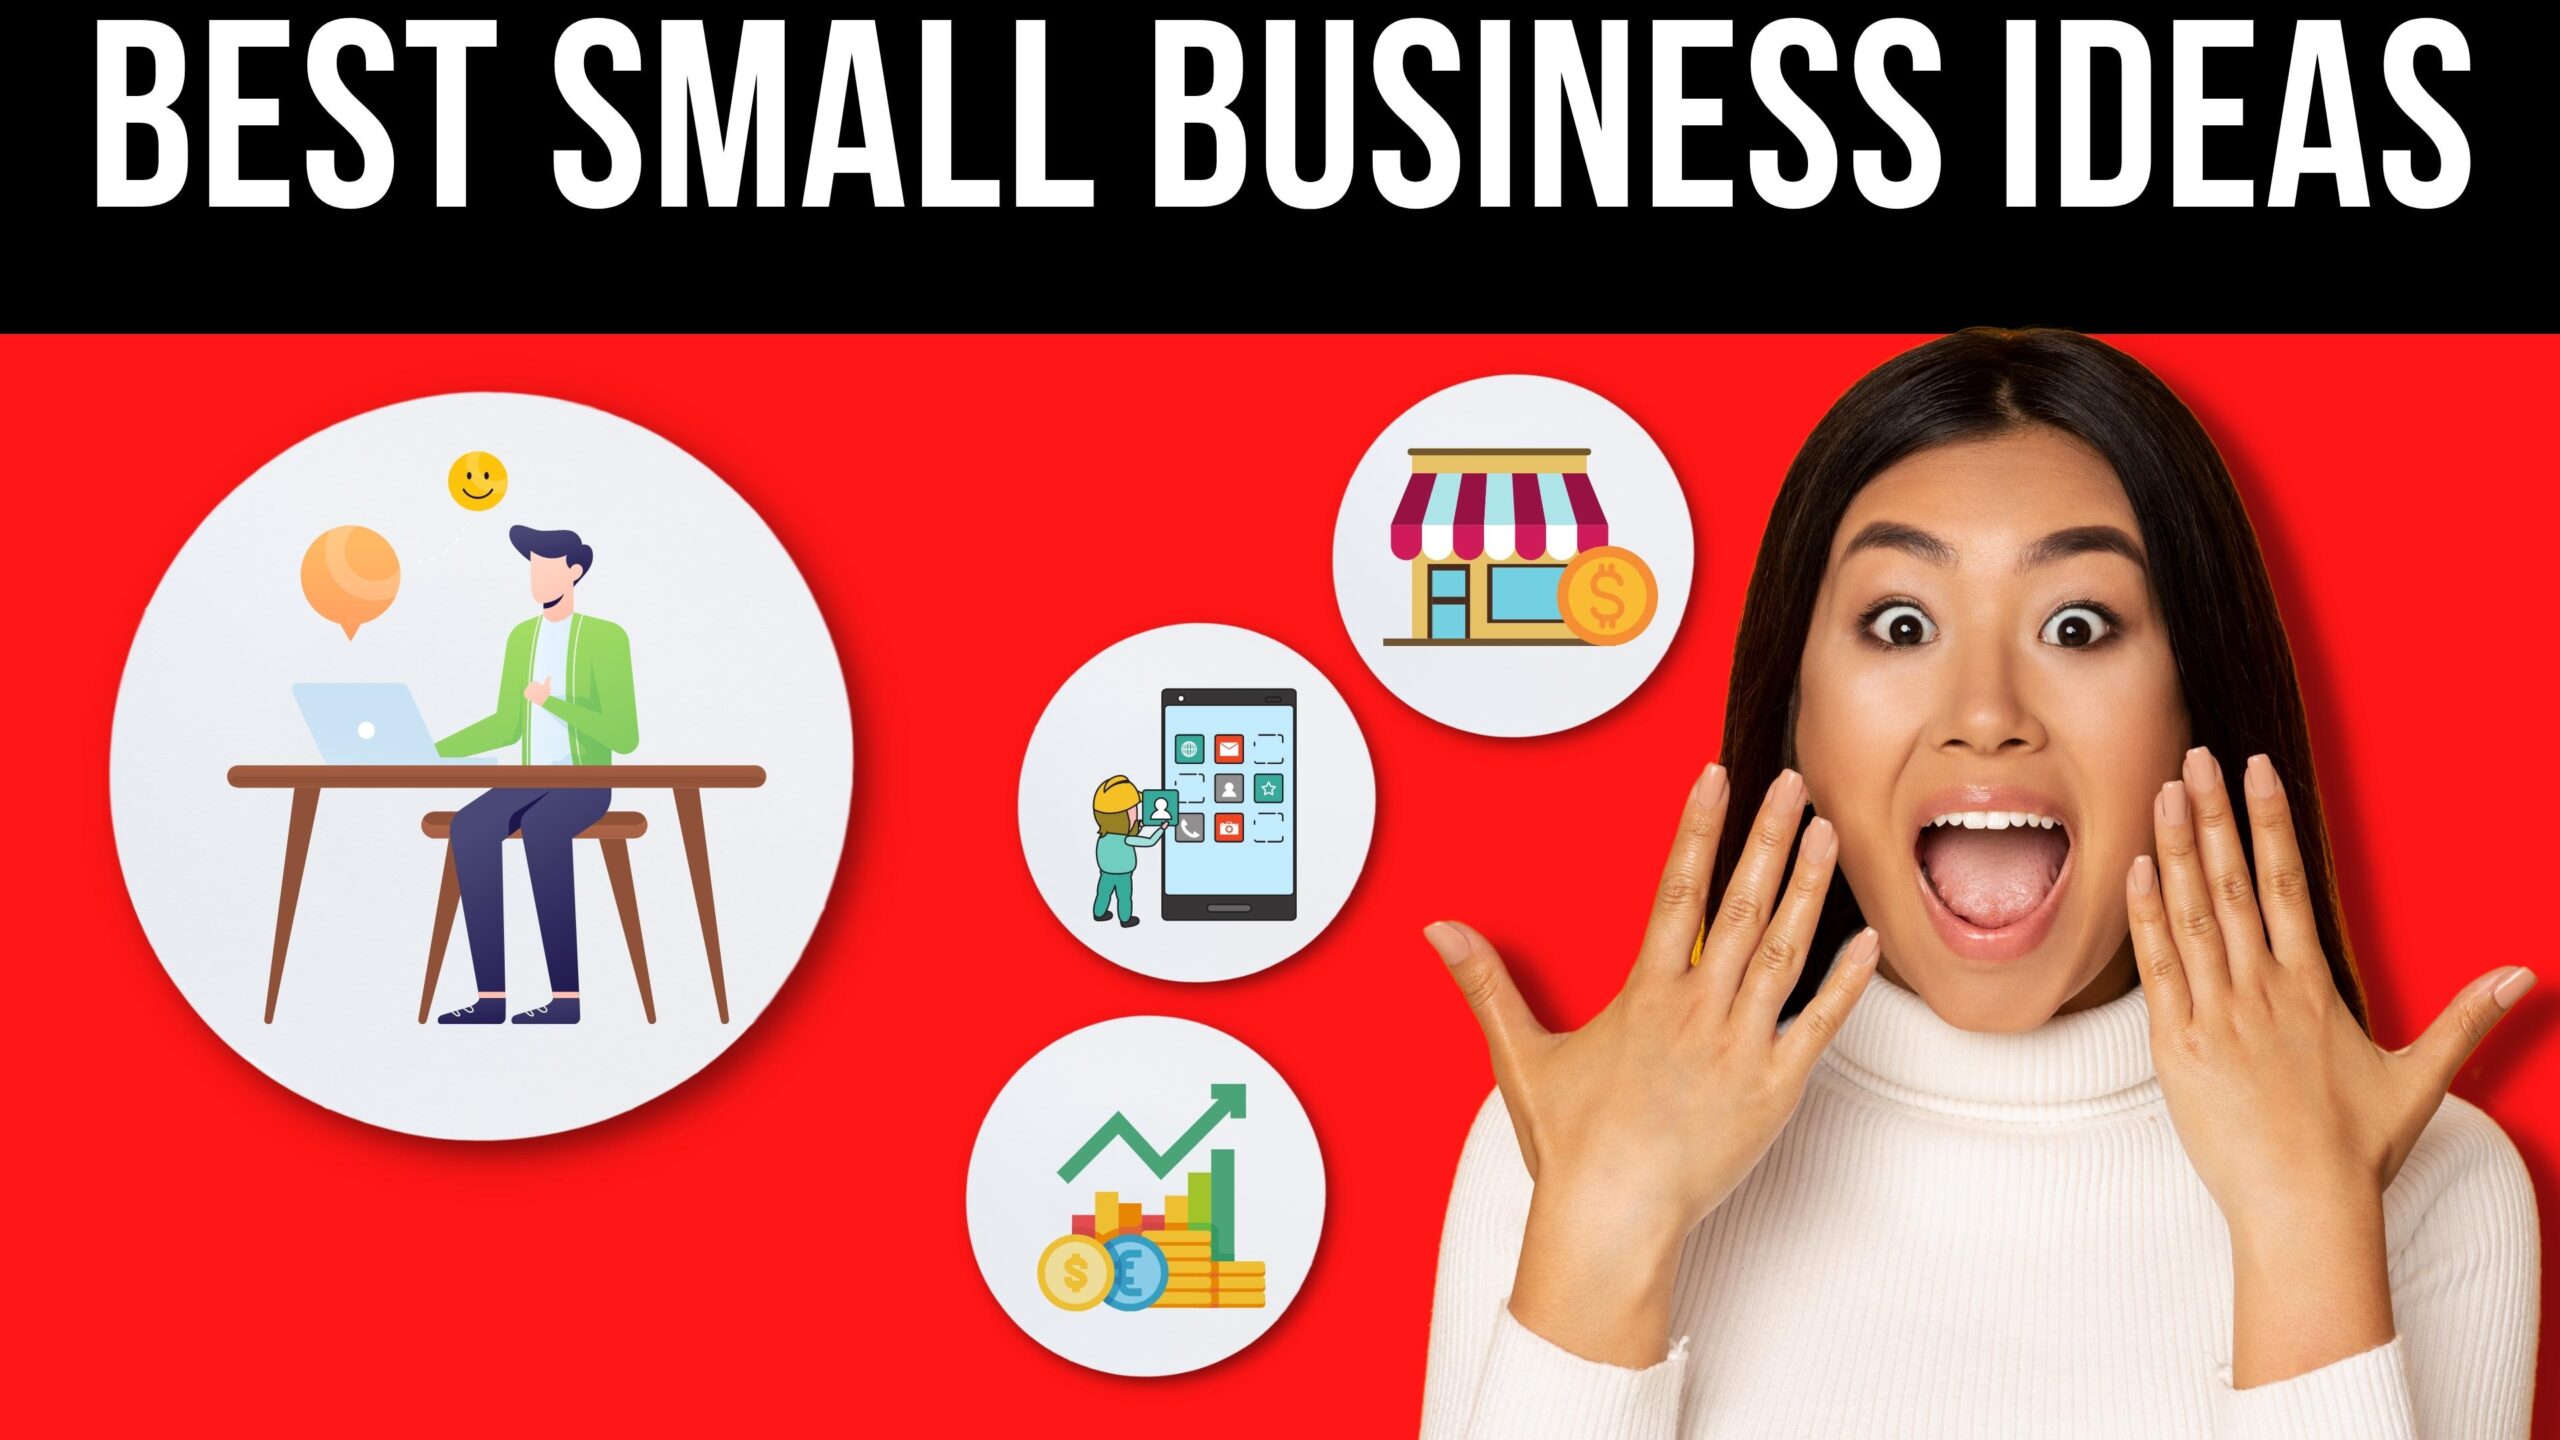 Best Small Business Ideas - Make $500 Per Day